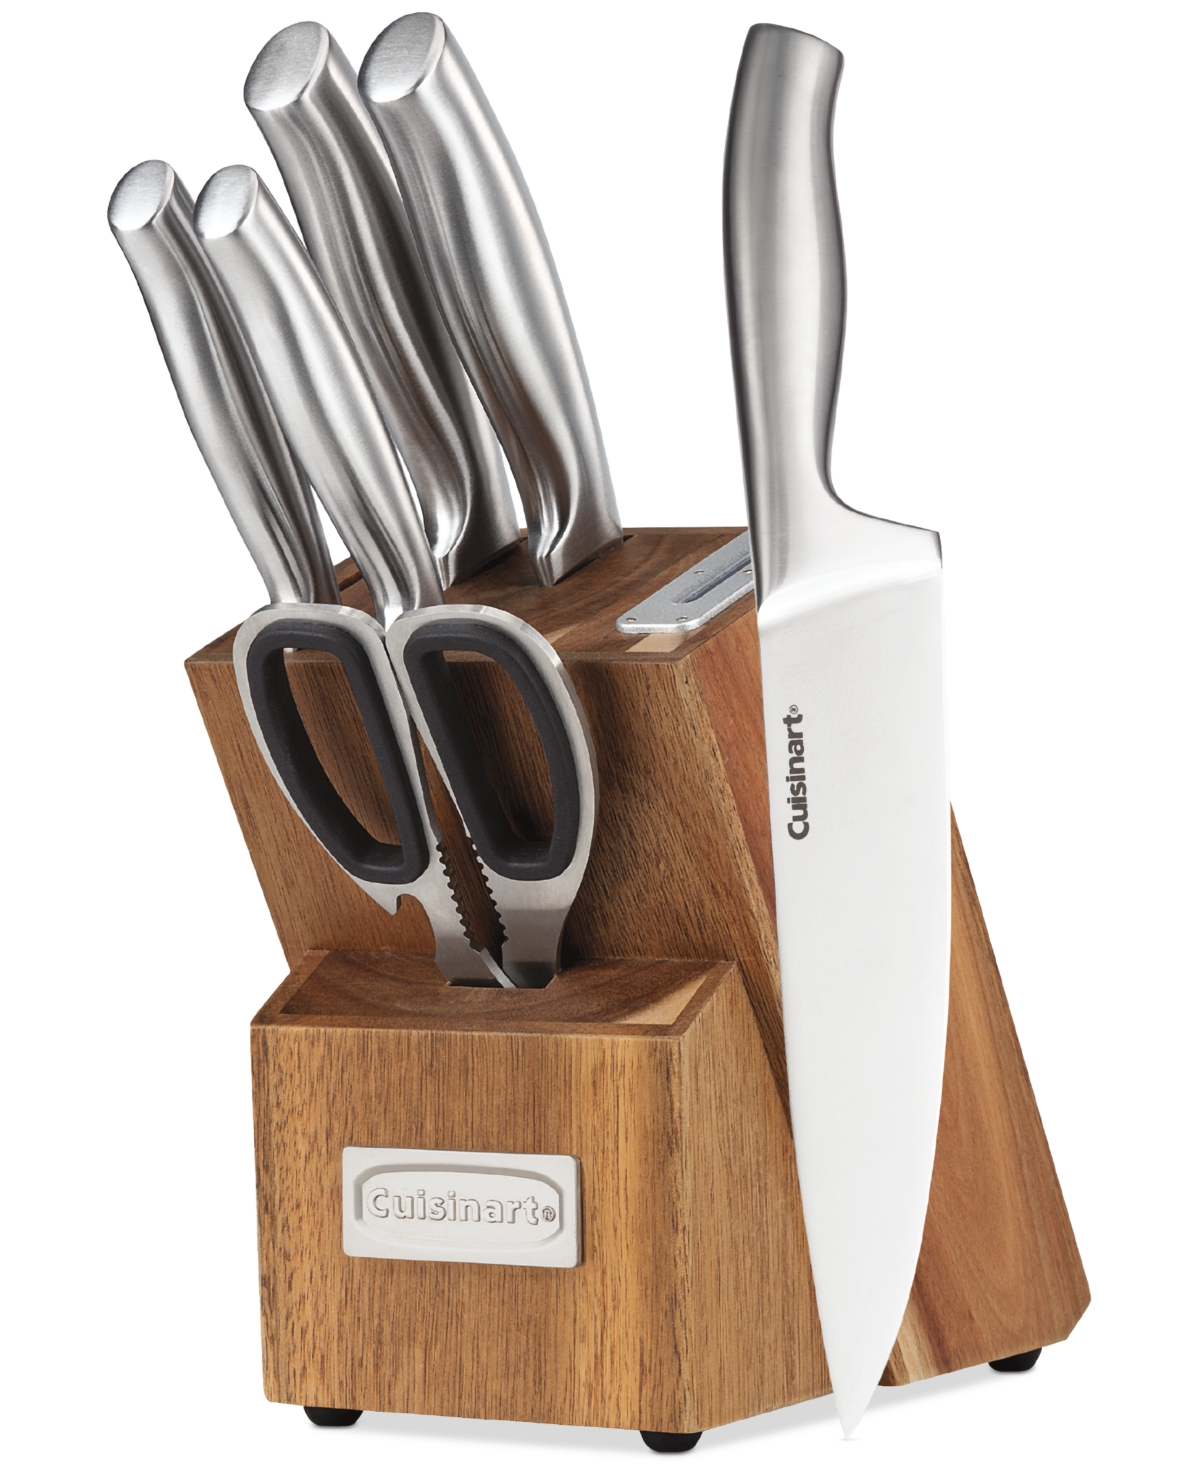 Cuisinart Classic 7-pc. Stainless Steel Knife & Block Set In No Color